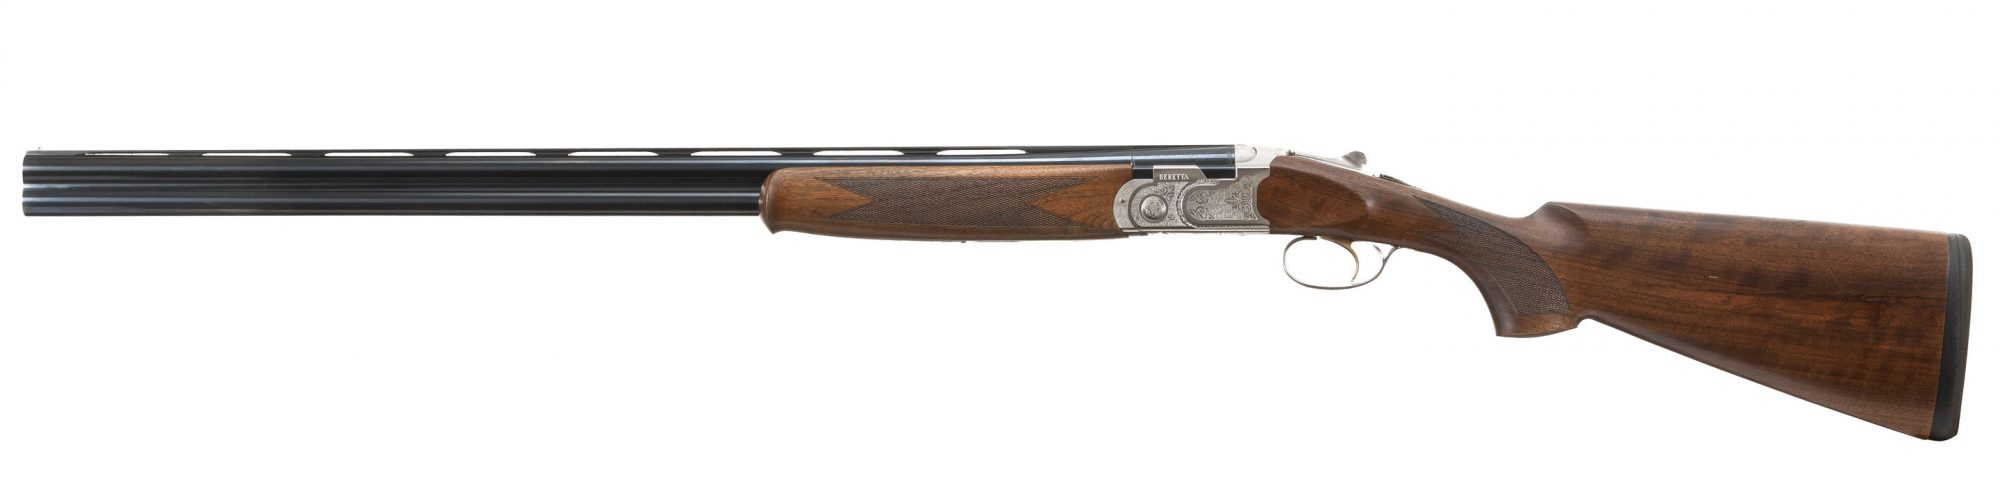 Photo of a pre-owned Beretta 686 Silver Pigeon I 20 gauge shotgun, for sale by Turnbull Restoration of Bloomfield, NY